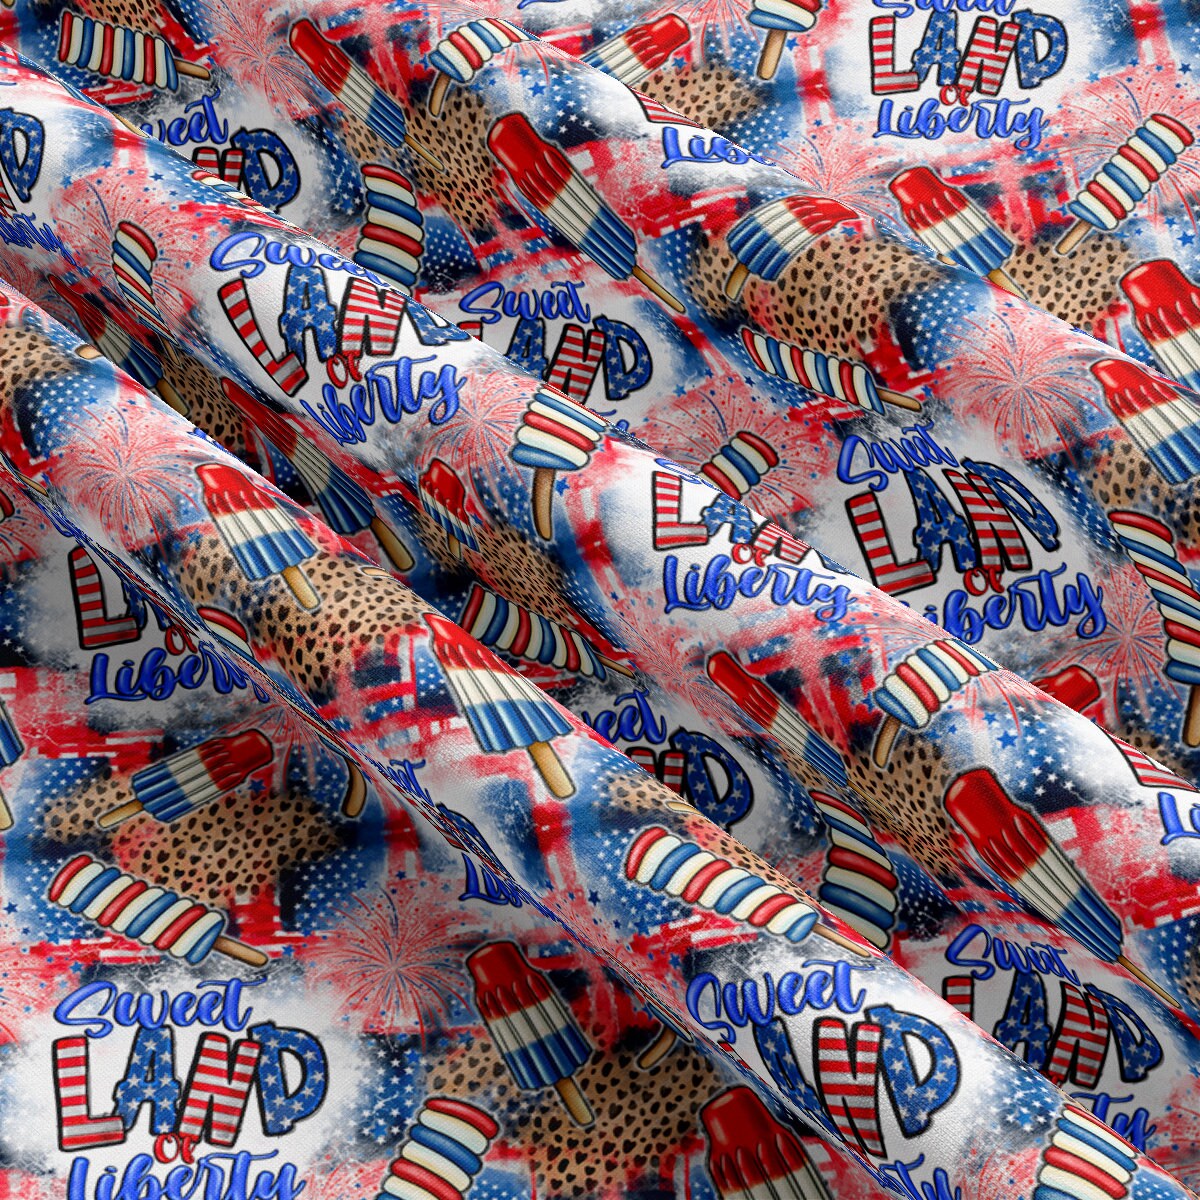 DBP Fabric Double Brushed Polyester DBP2738 4th of July Patriotic